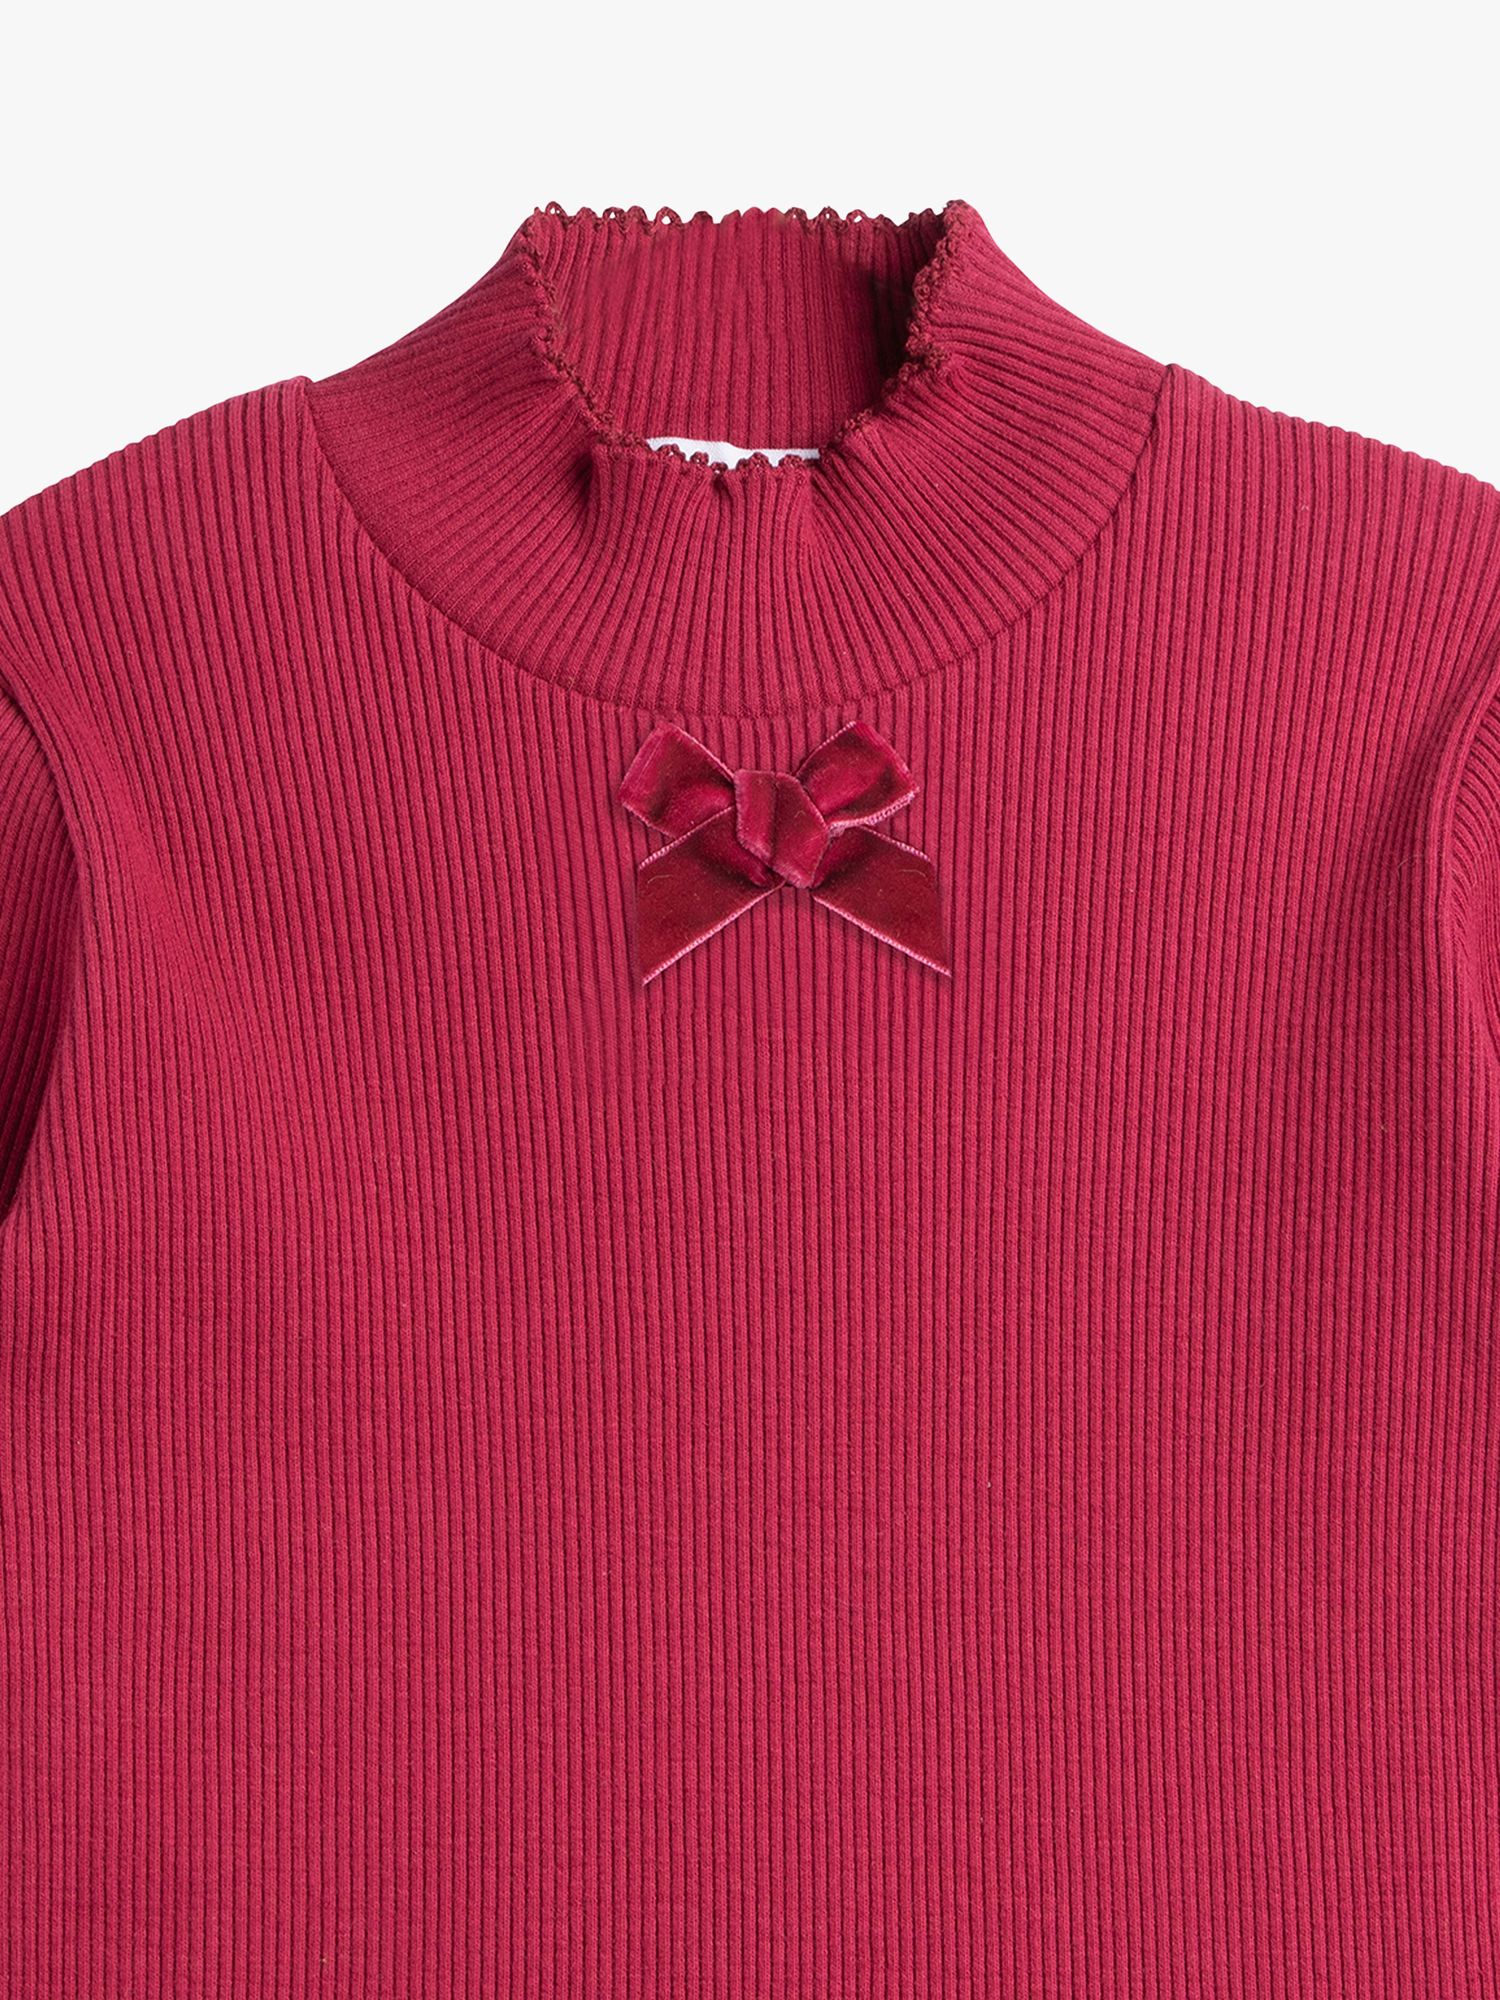 Trotters Kids' Grace Bow Detail Jersey Top at John Lewis & Partners